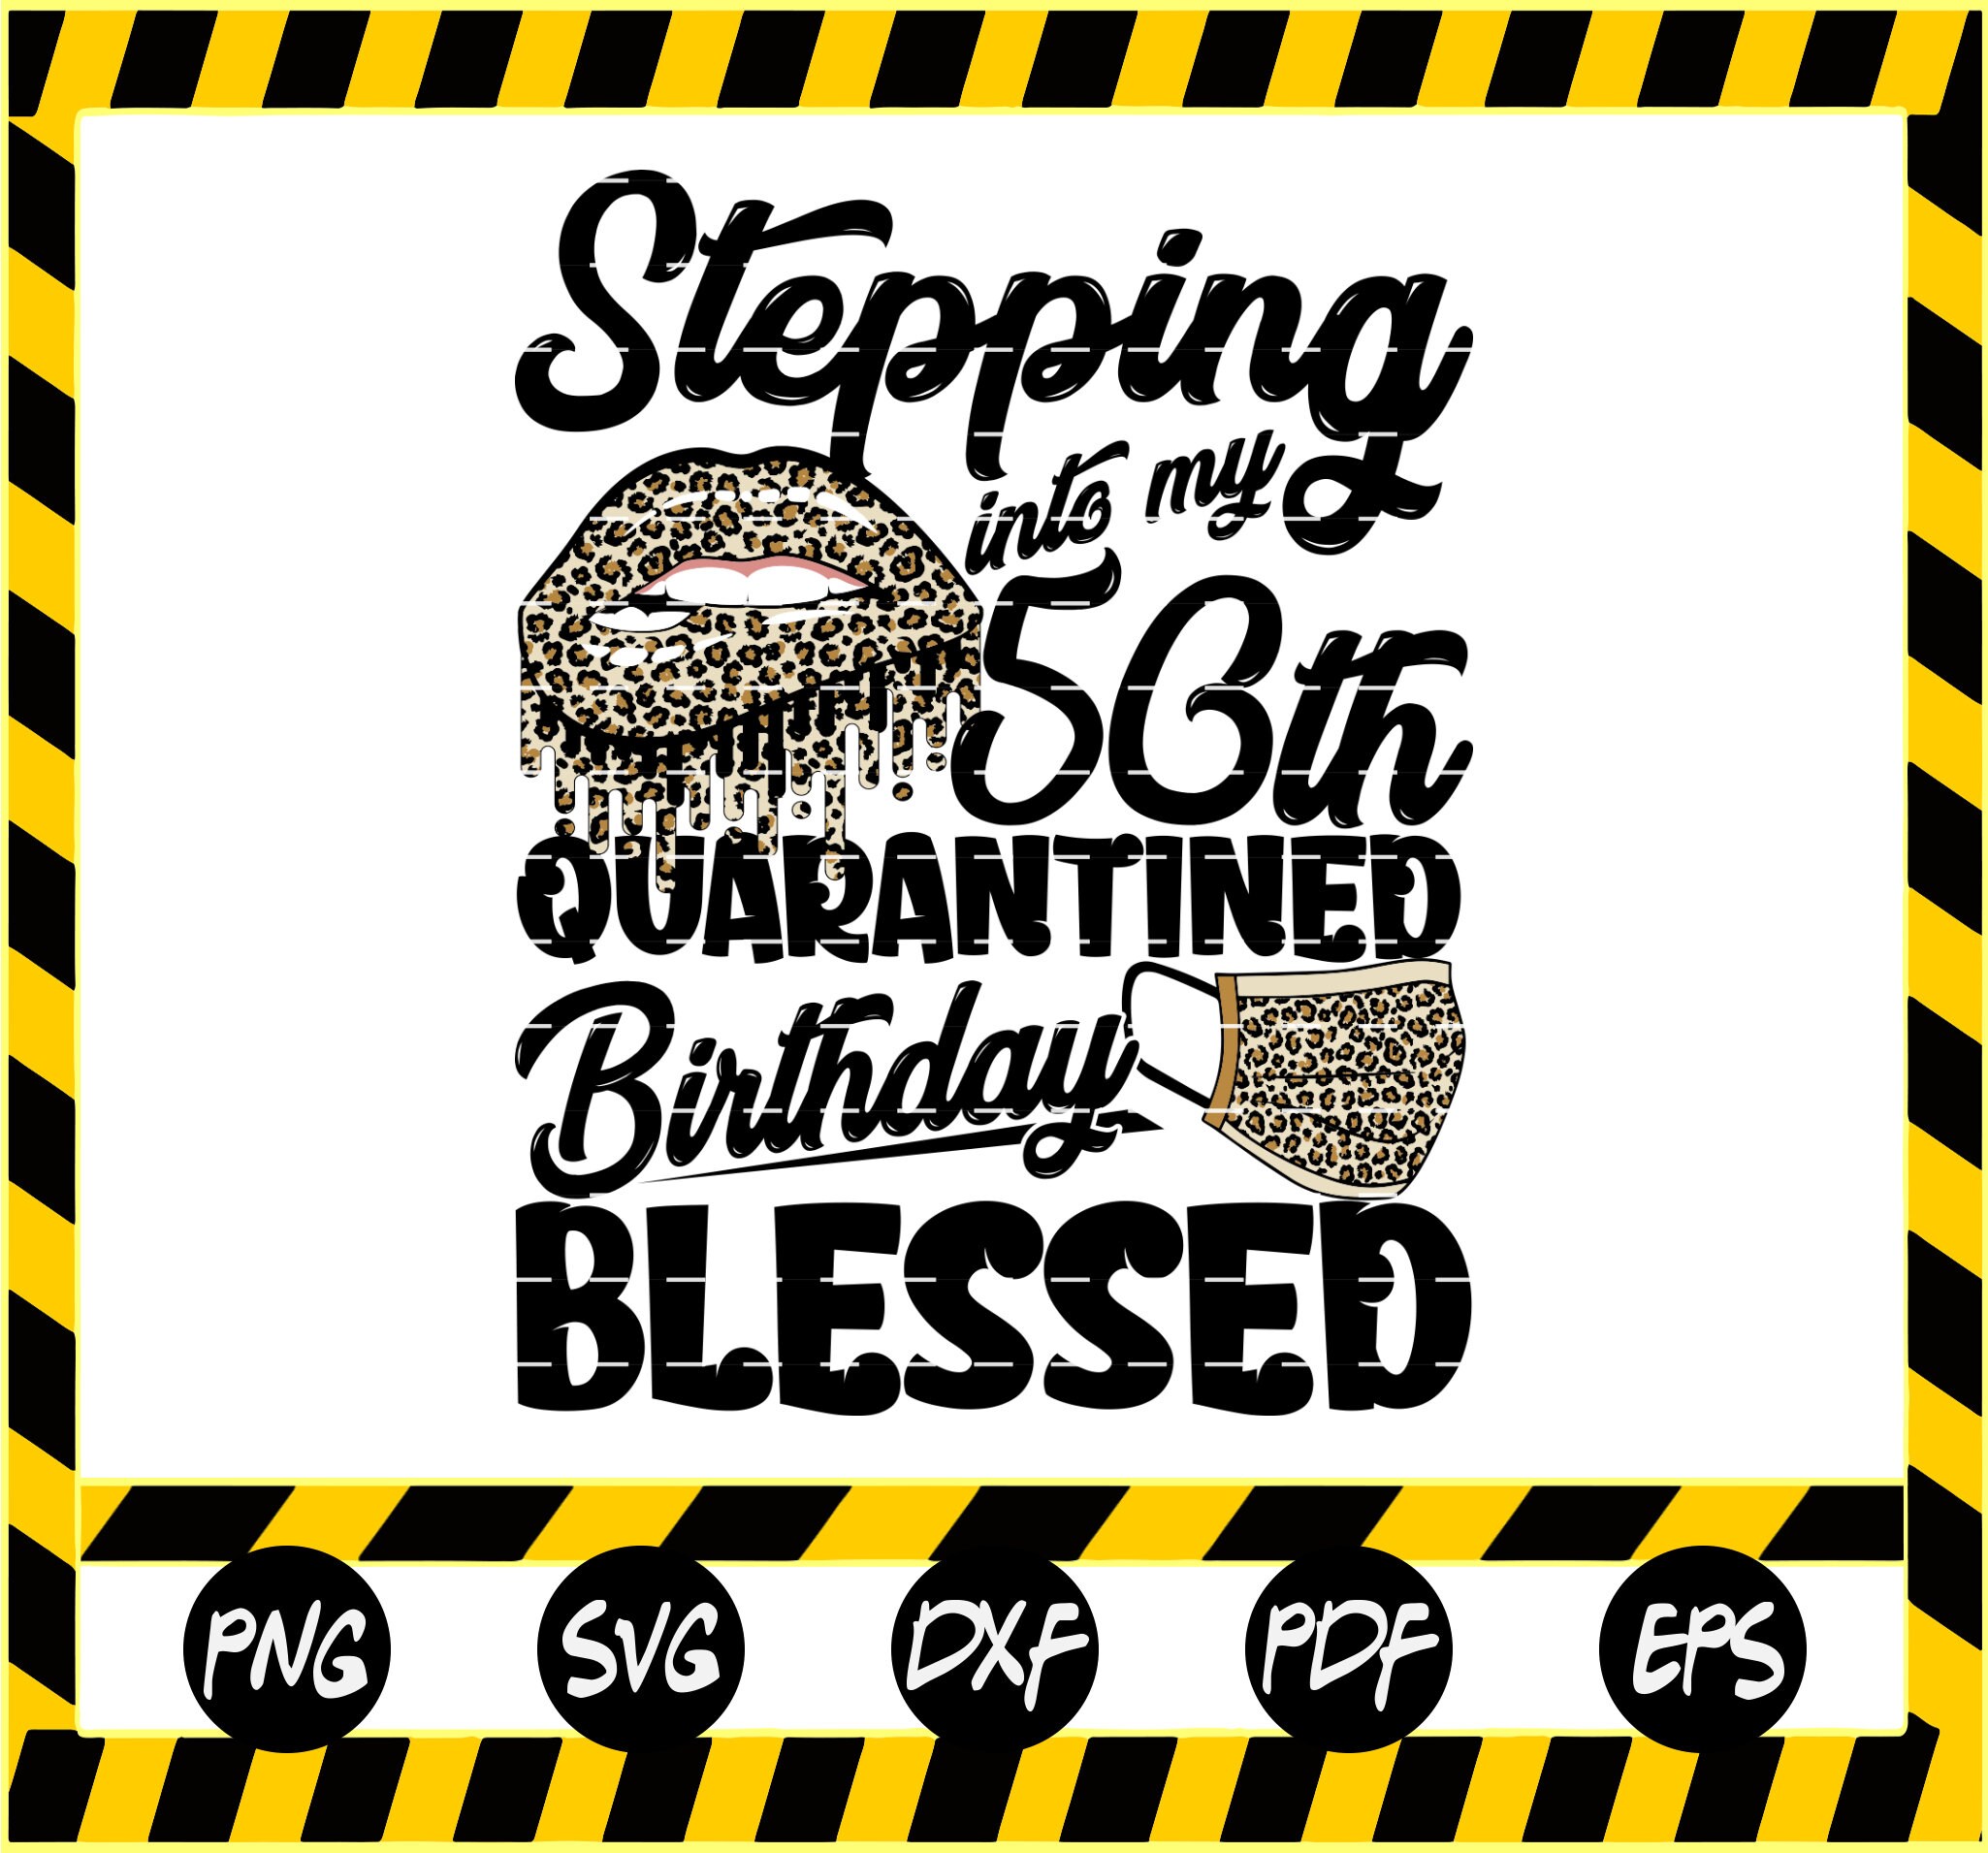 Download Stepping into my 50th Quarantined Birthday Blessed SVG ...